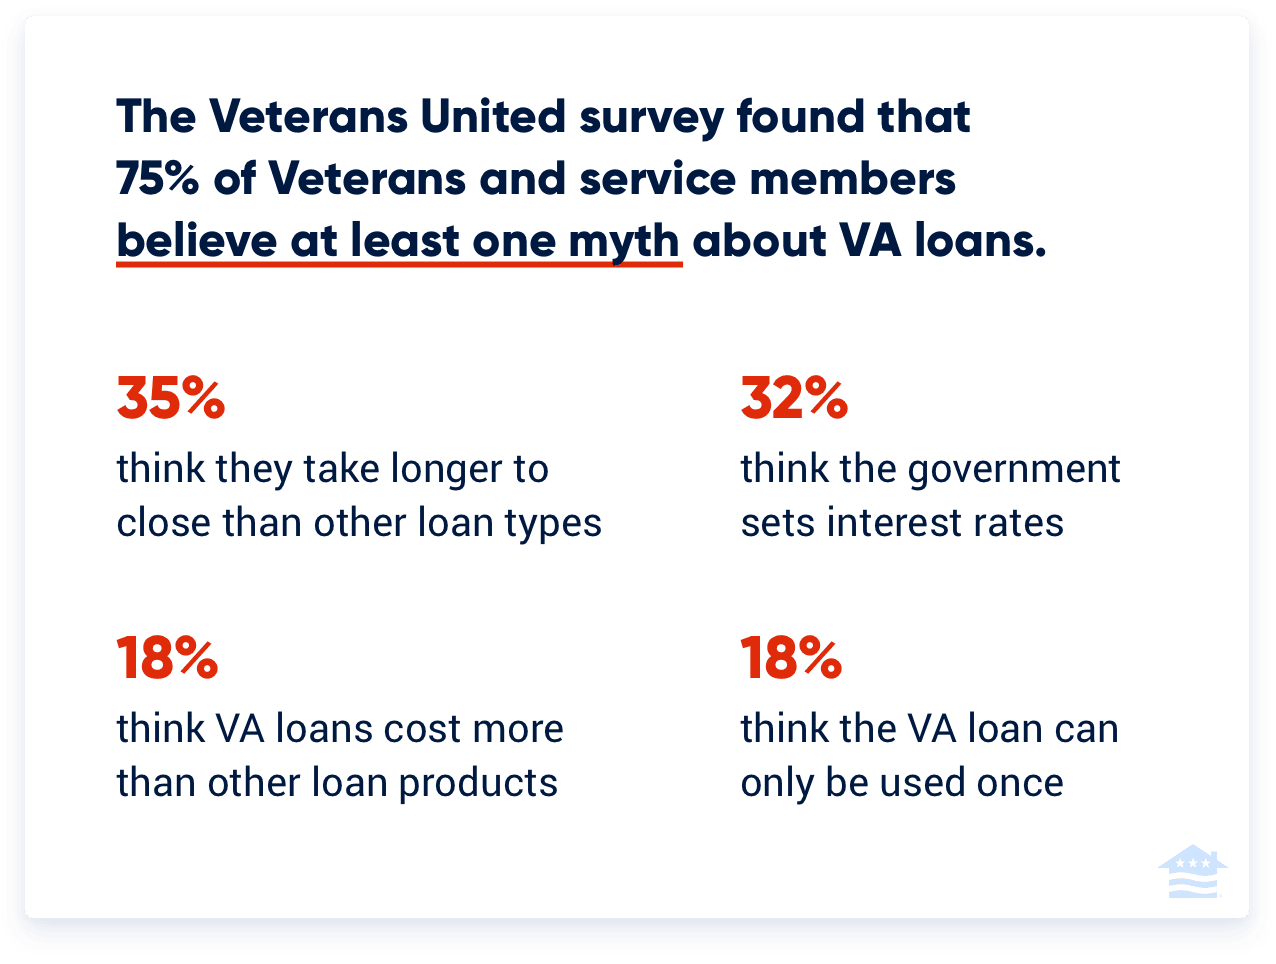 The Veterans United survey found that 75% of Veterans and service members believe at least one myth about VA loans